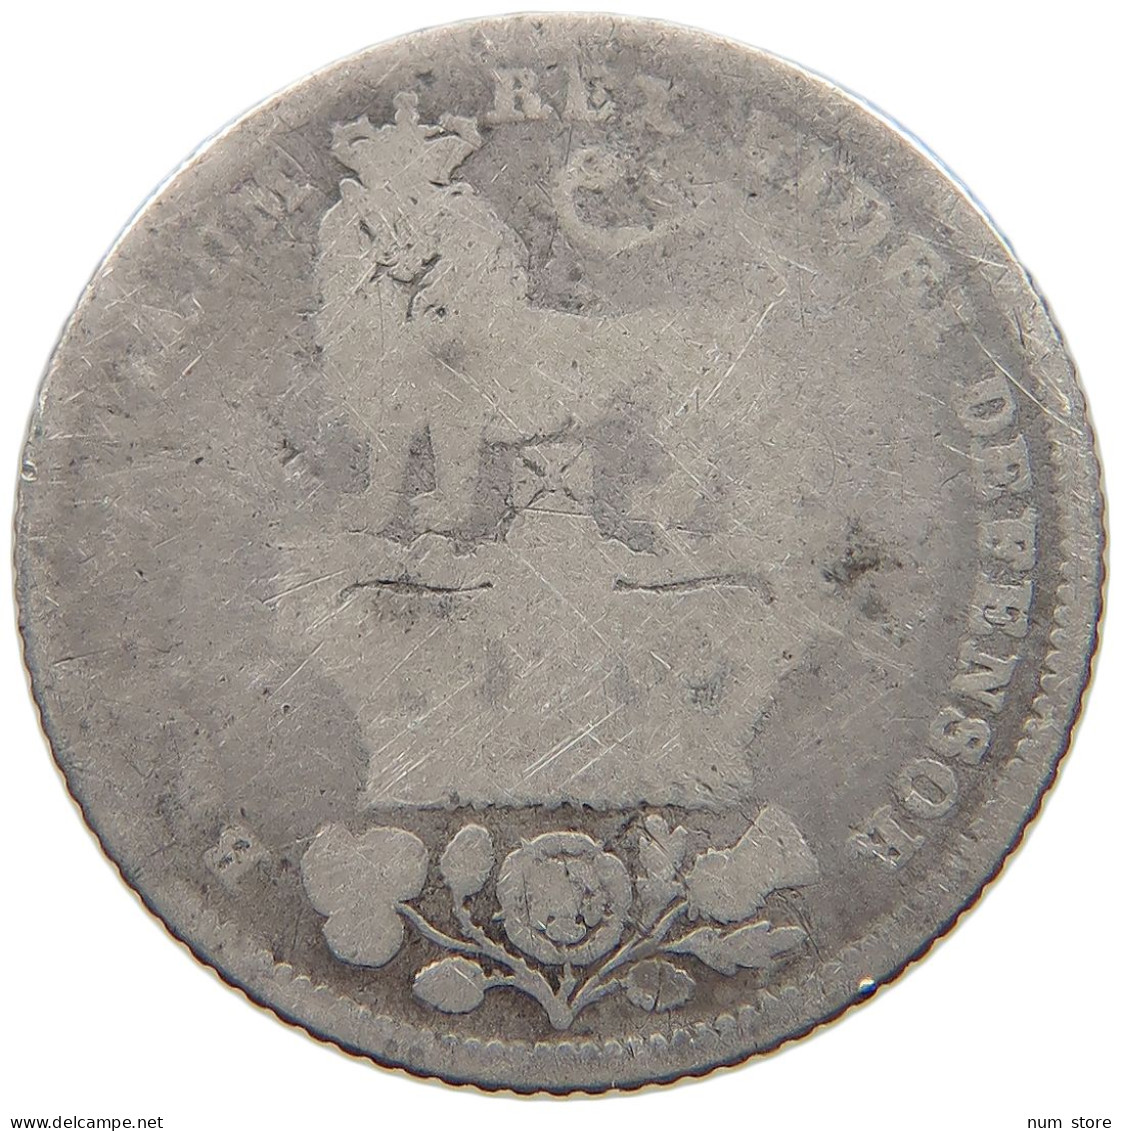 GREAT BRITAIN SIXPENCE 1829 GEORGE IV. (1820-1830) #a032 0945 - H. 6 Pence